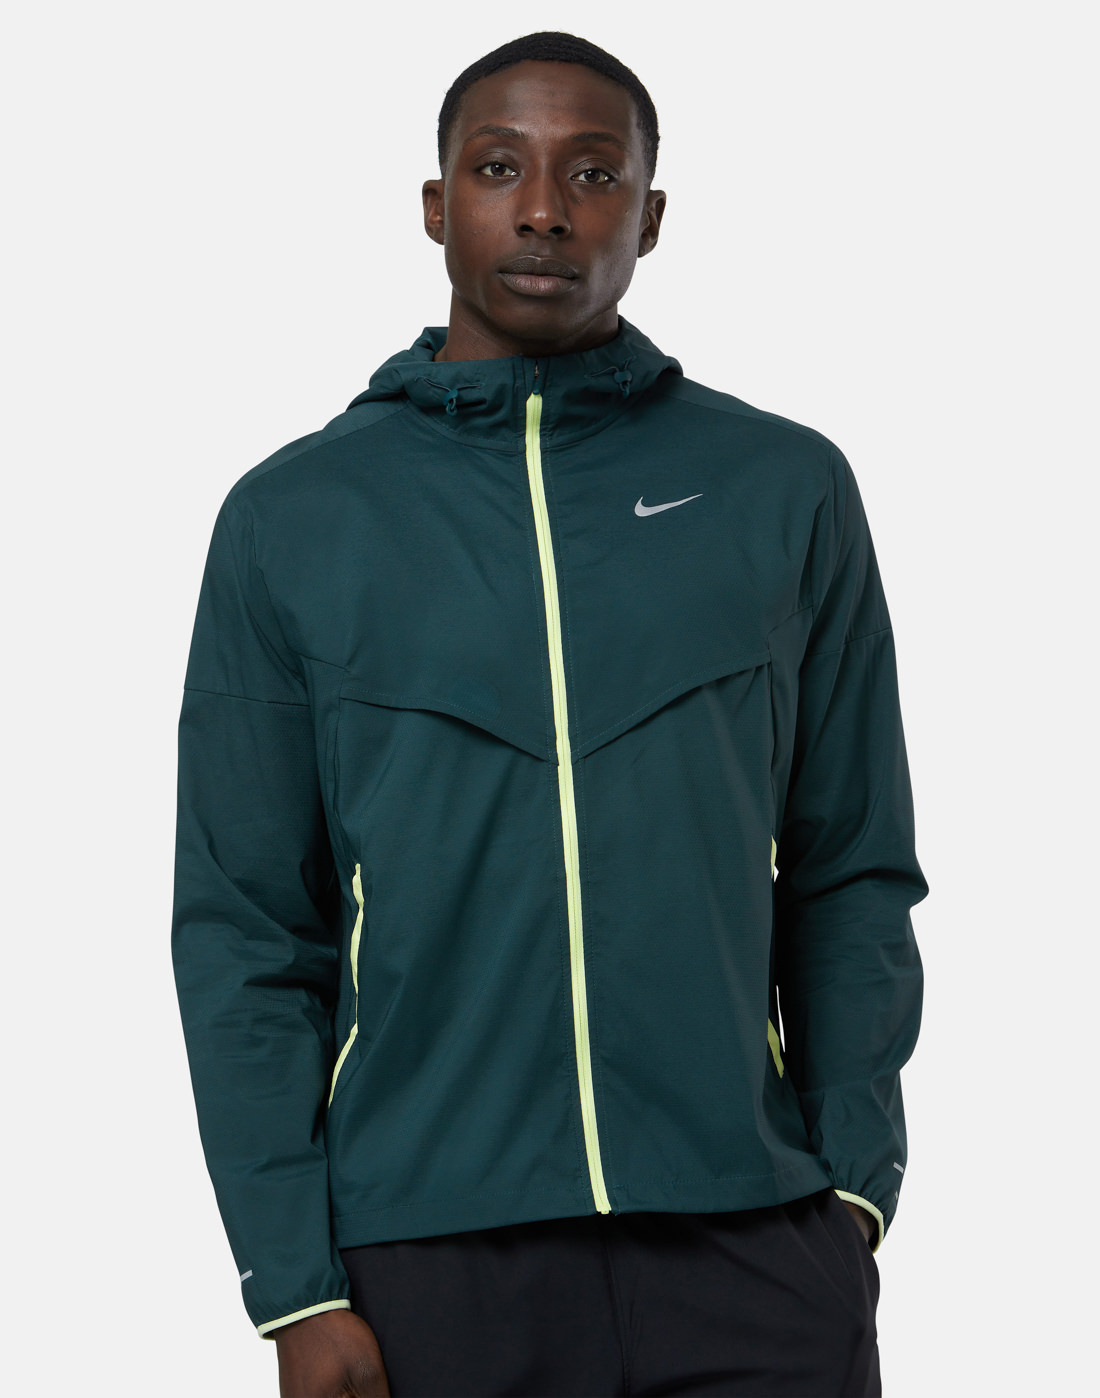 Nike Mens Windrunner Jacket - Green | Life Style Sports IE